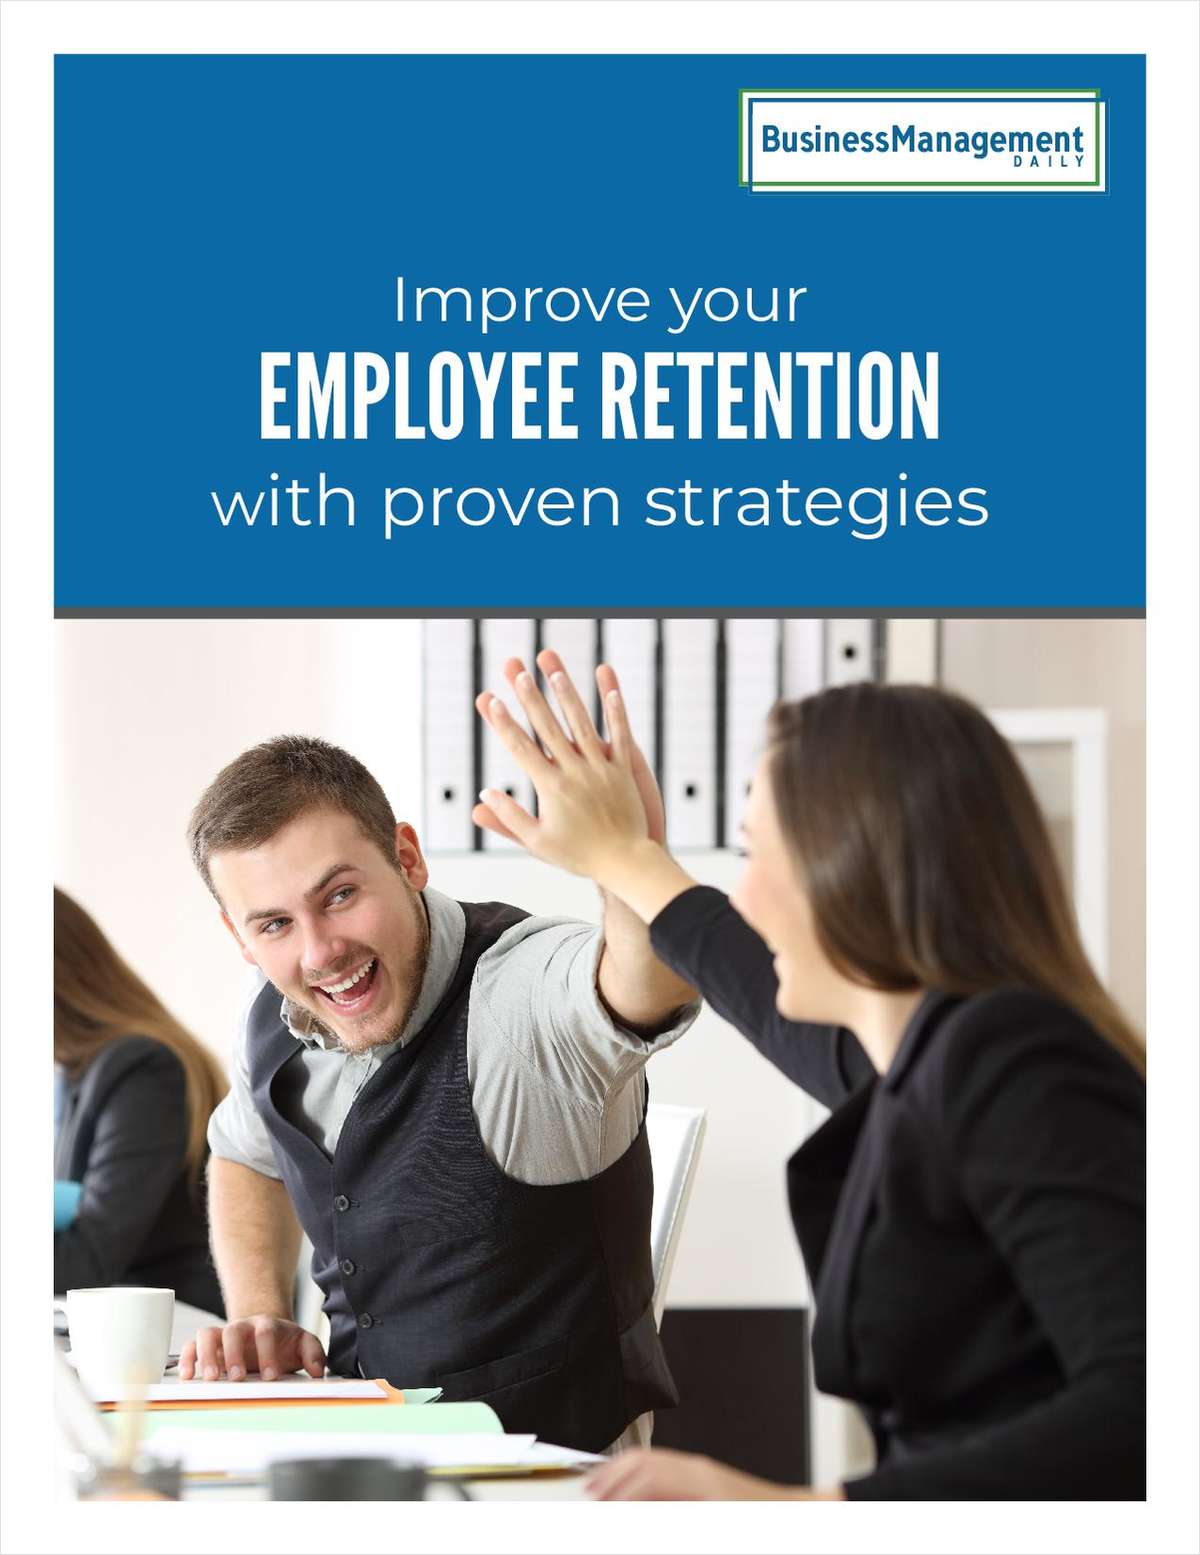 Improve your employee retention with proven strategies